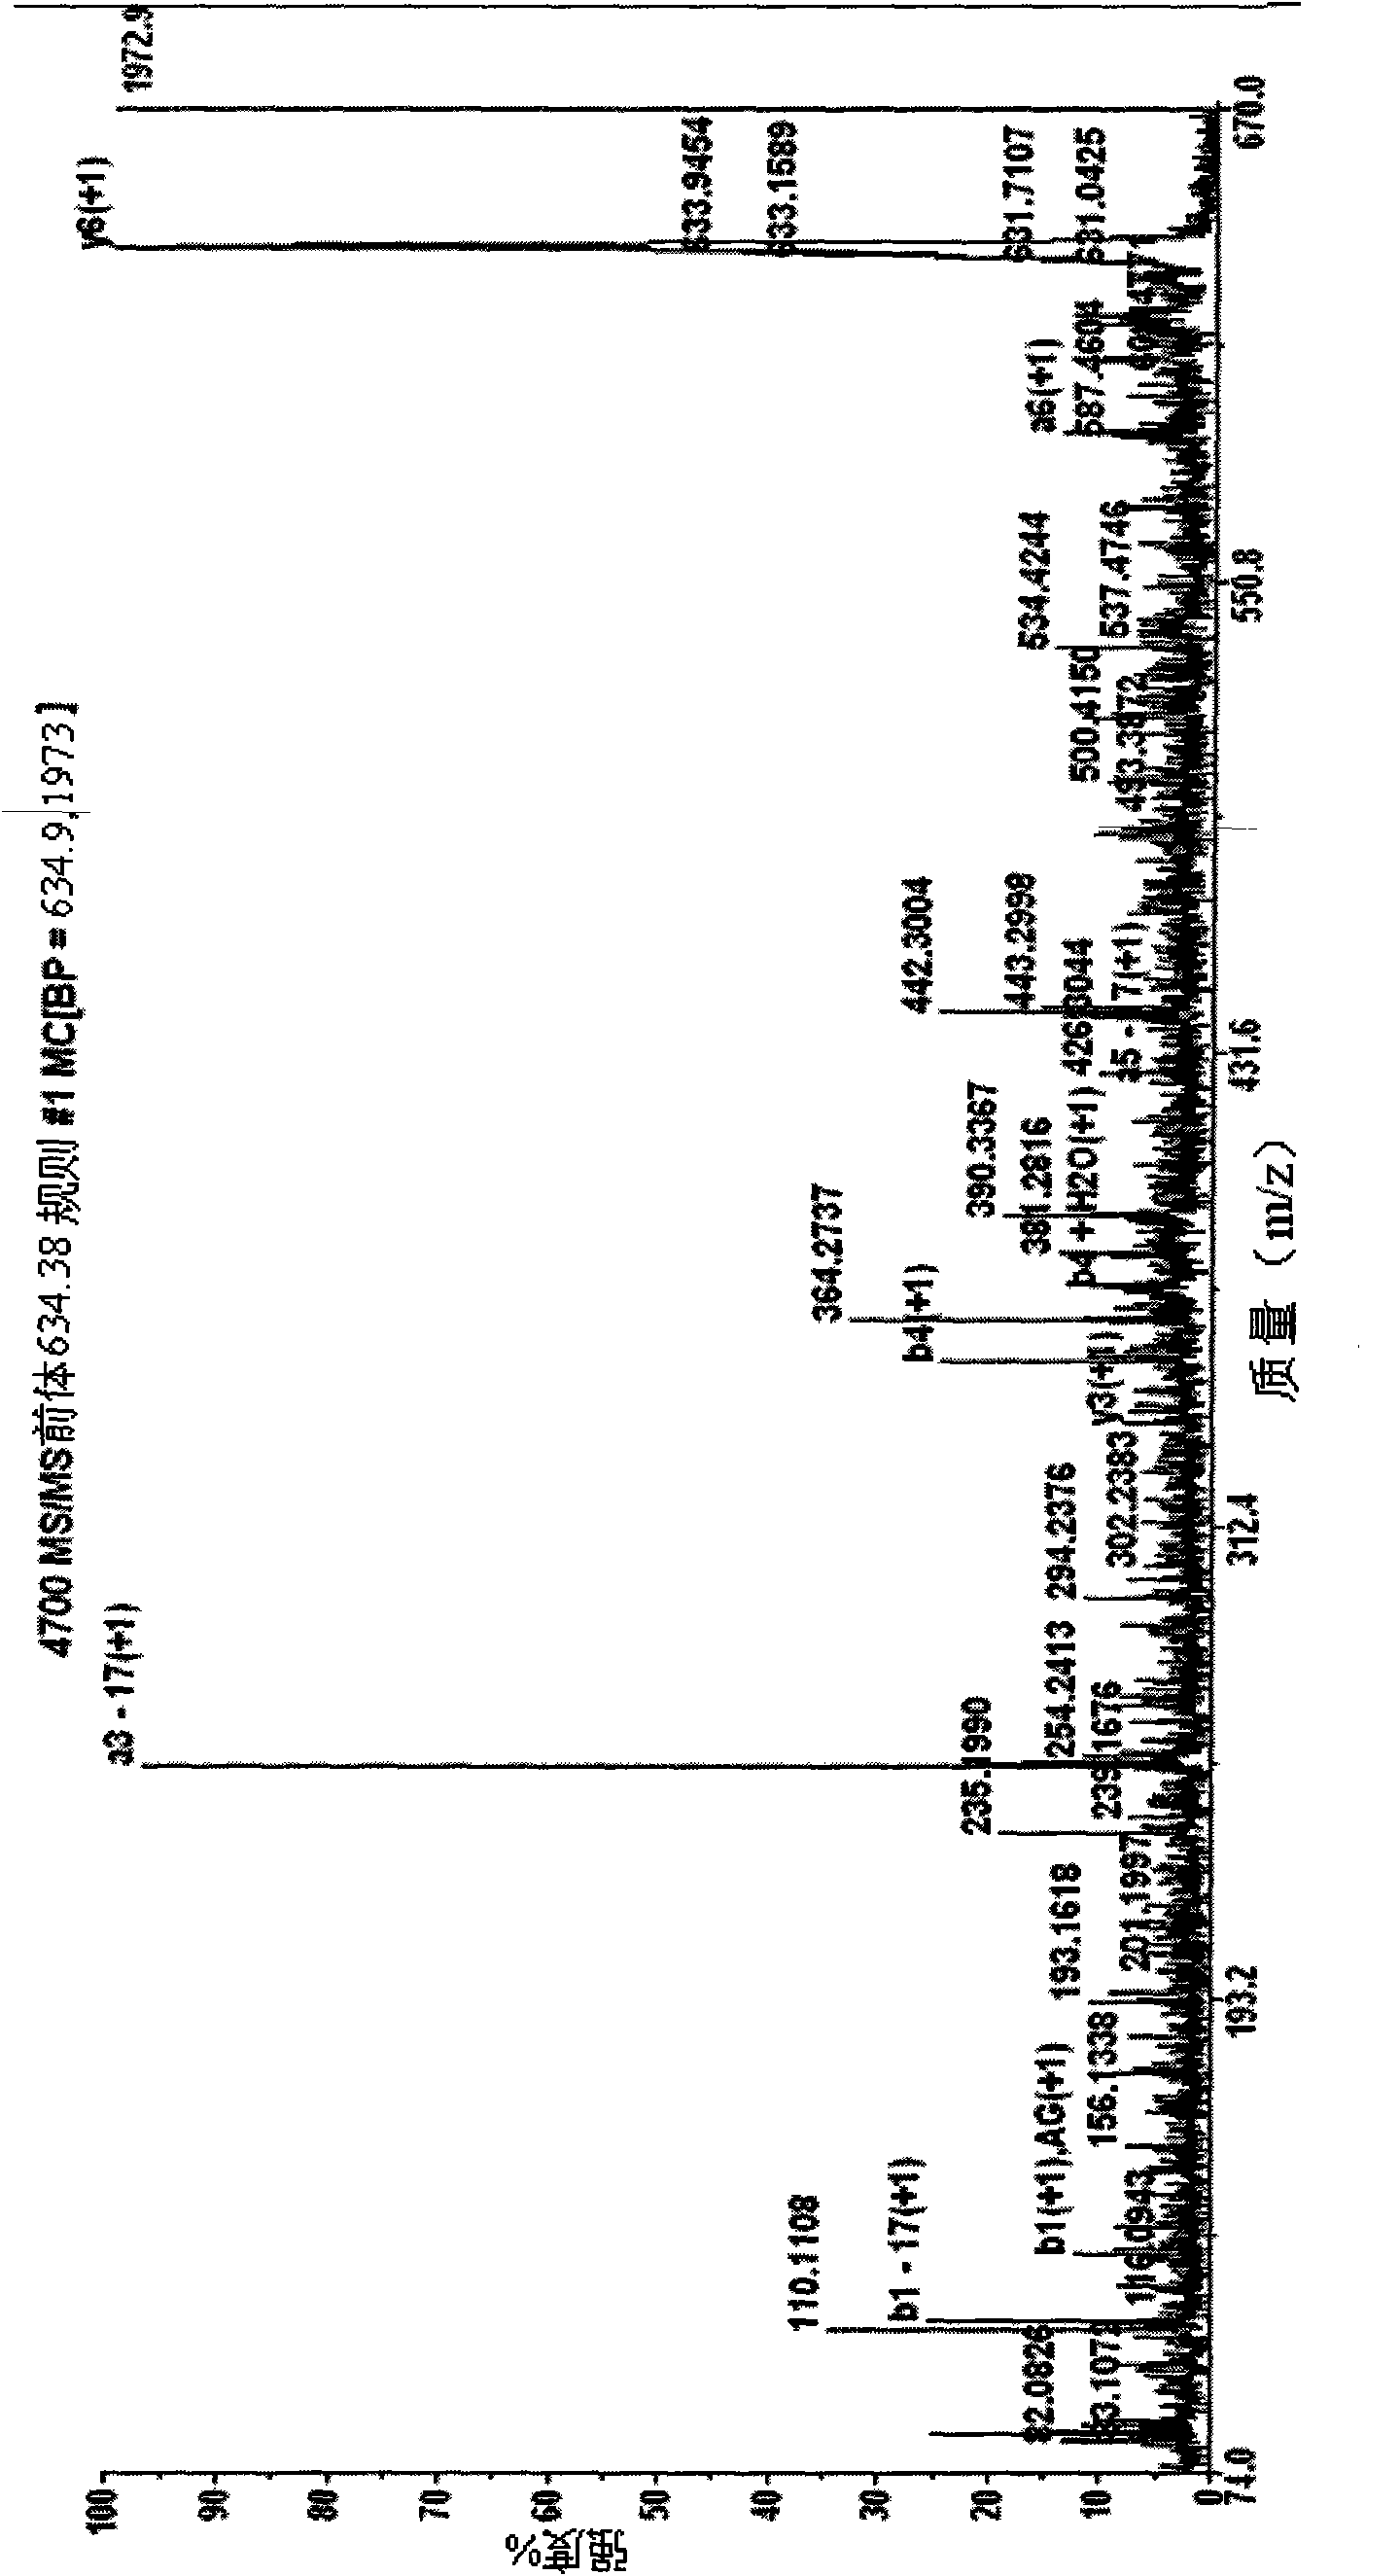 ACE inhibitory peptide in fermented milk and preparation method thereof